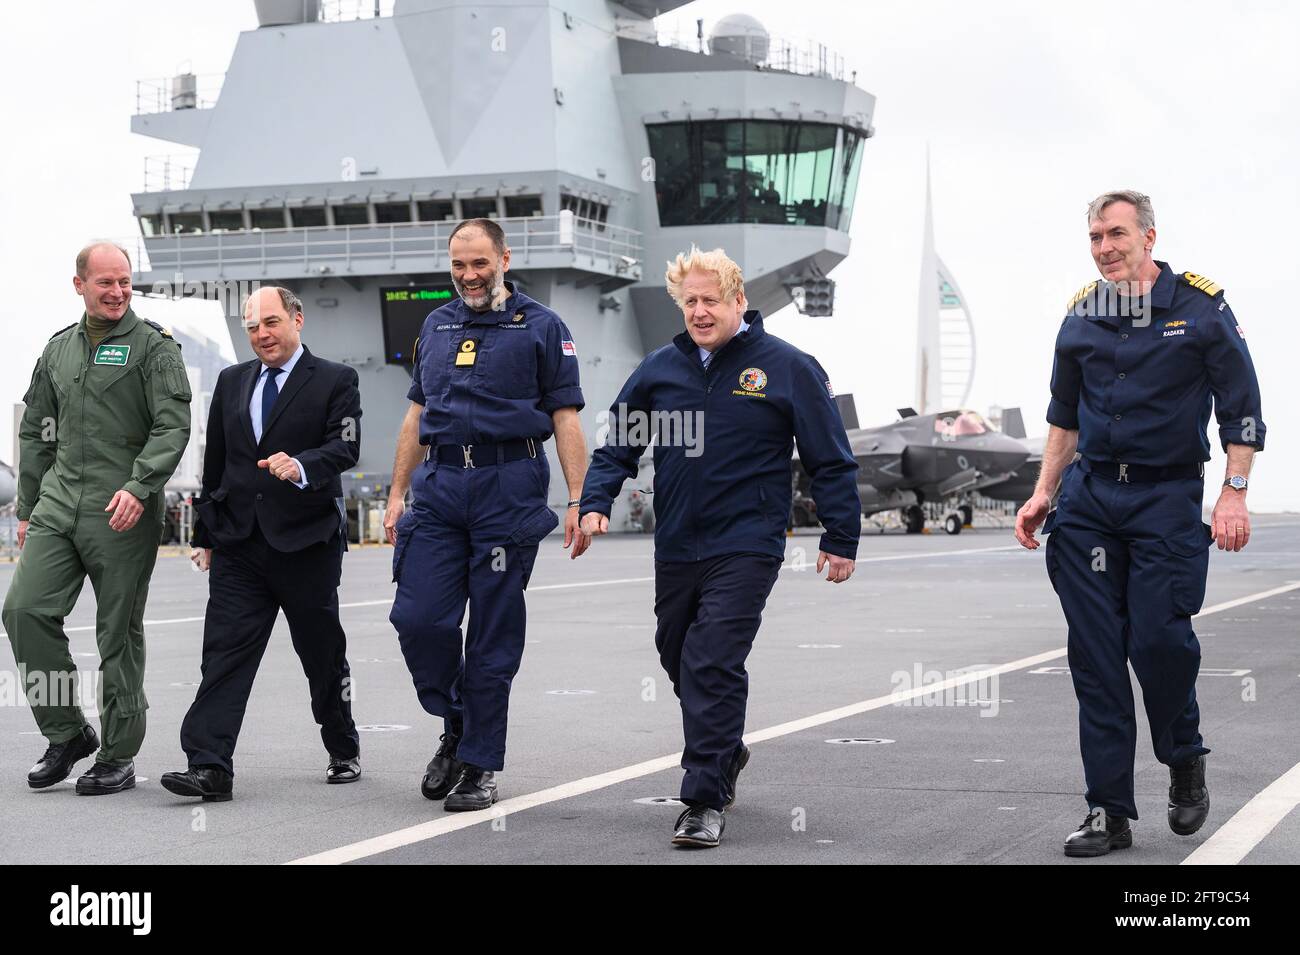 (Left to right) Air Chief Marshal Sir Mike Wigston, Defence Secretary Ben Wallace, Commodore Steve Moorhouse, Prime Minister Boris Johnson, and First Sea Lord Admiral Tony Radakin face strong winds as they walk on the flight deck, during a visit aboard HMS Queen Elizabeth in Portsmouth ahead of its first operational deployment to the Far East. Picture date: Friday May 21, 2021. Stock Photo